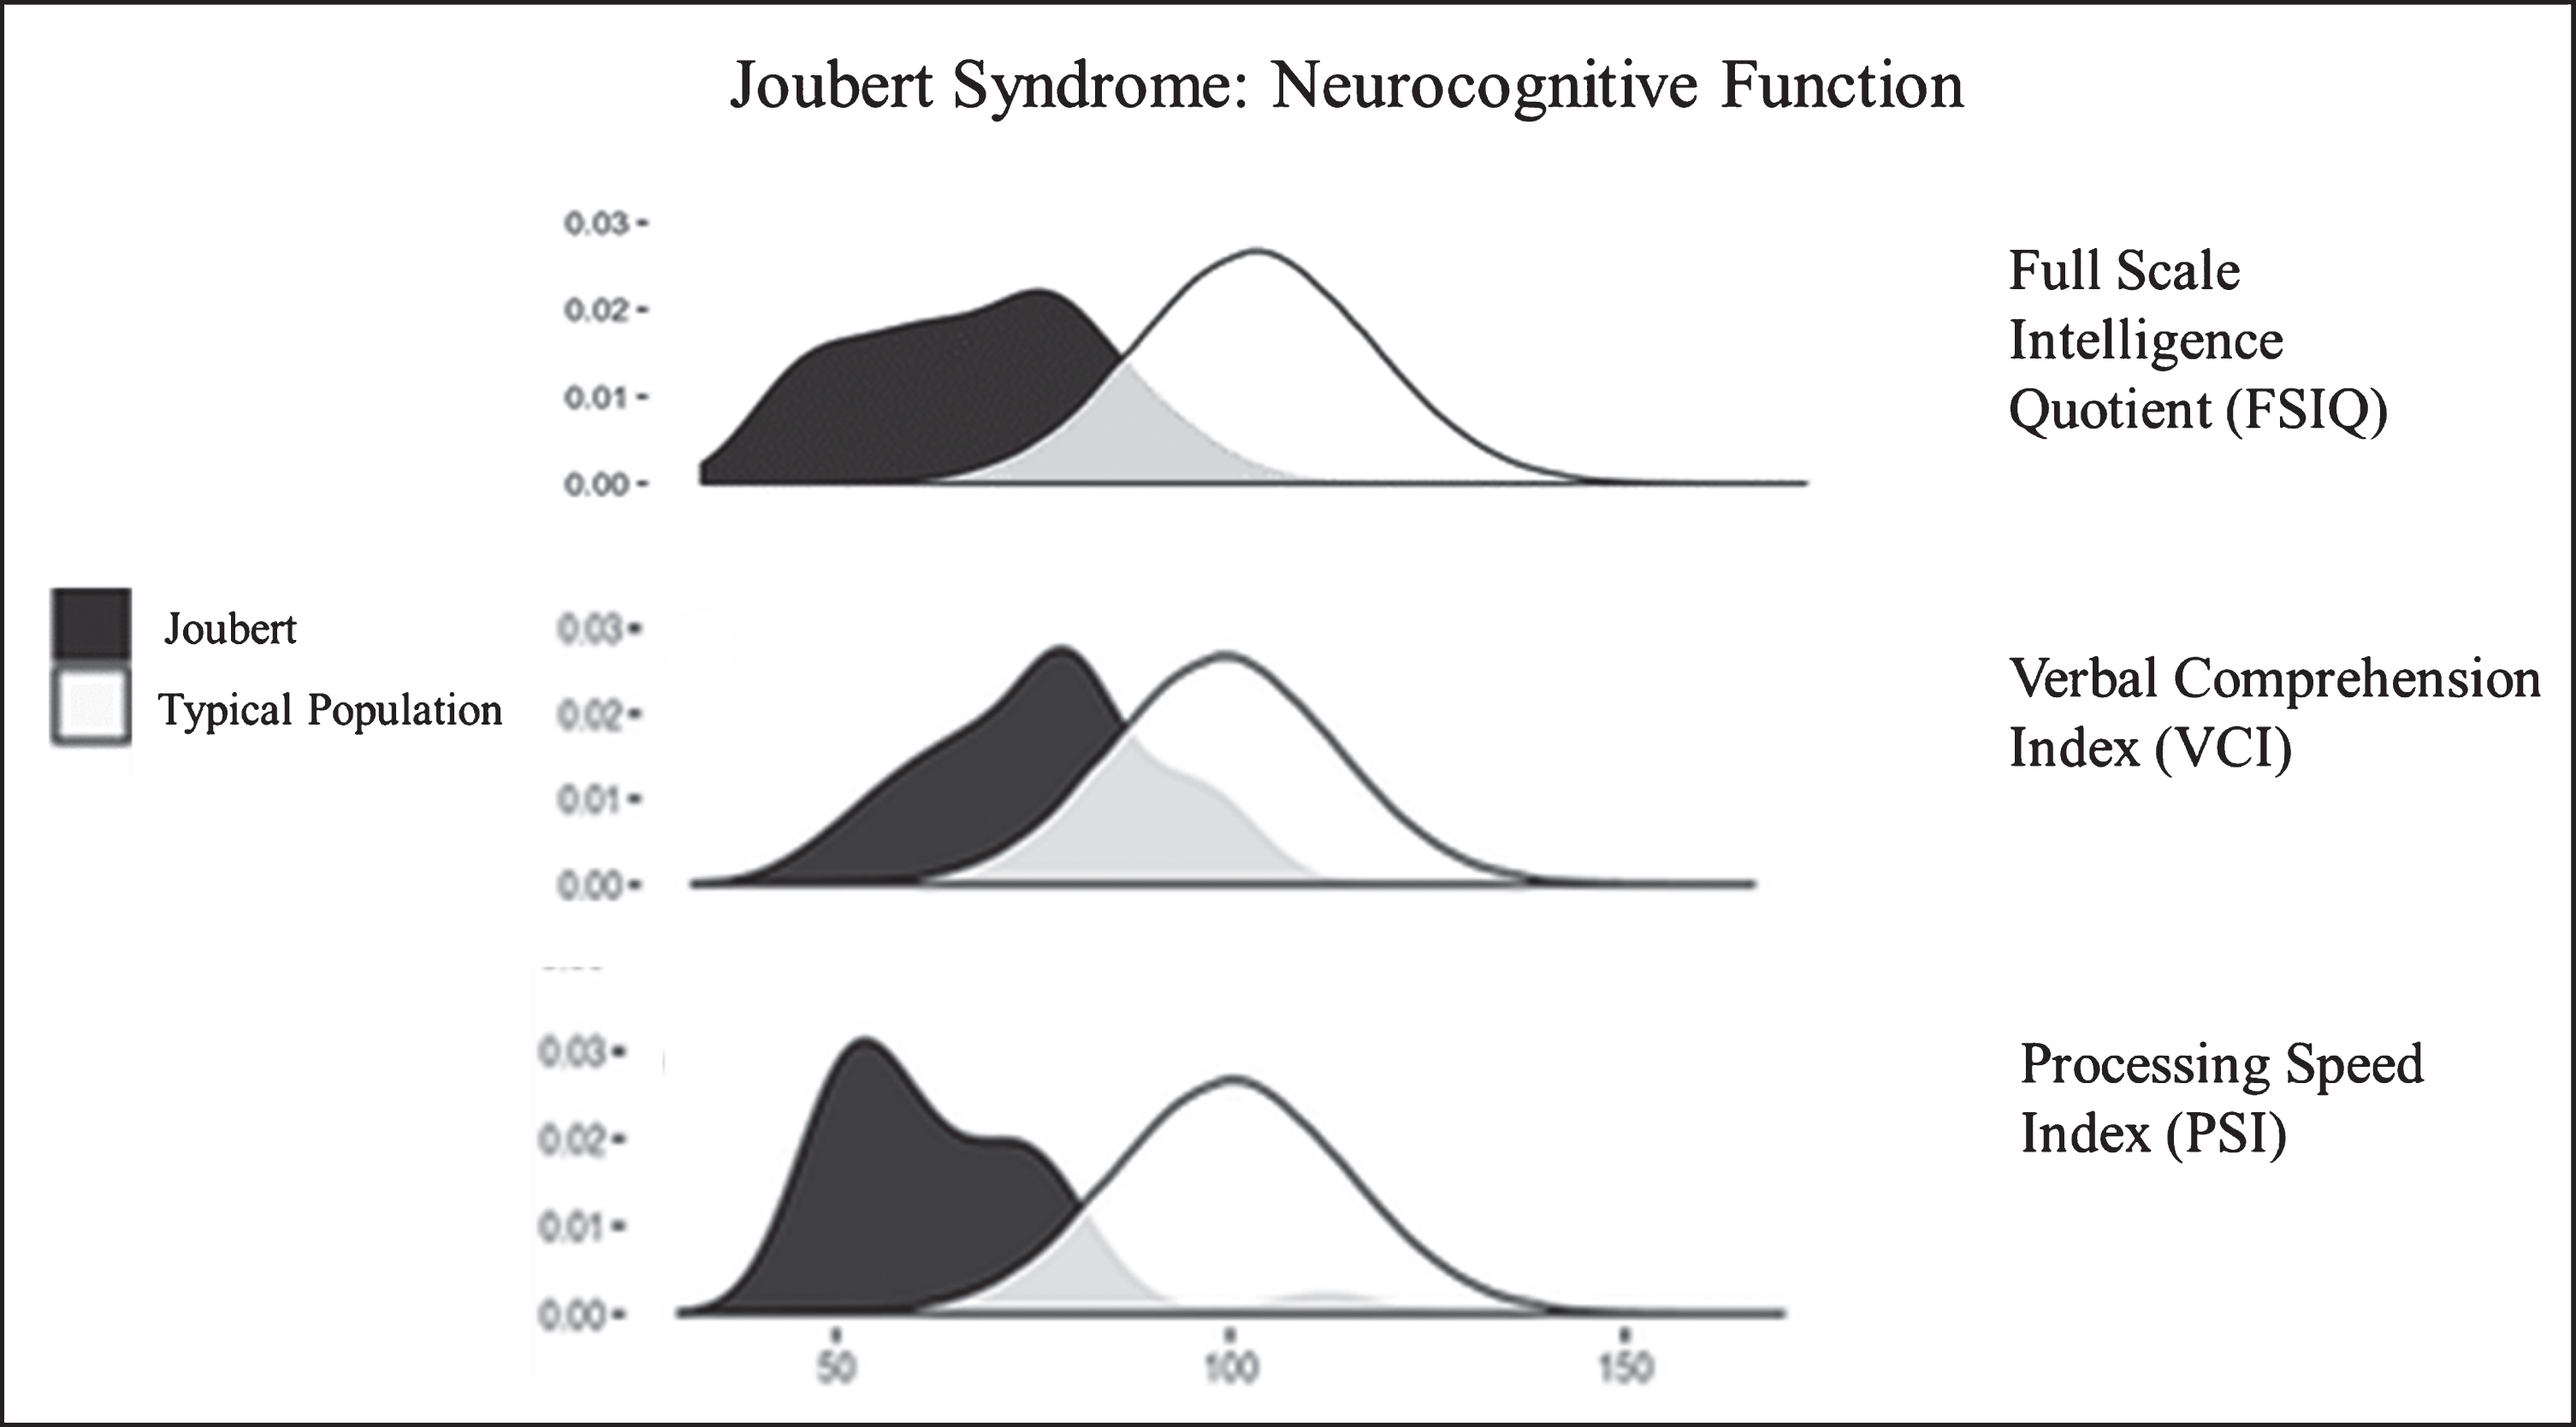 Neurocognitive function in JS in comparison to the unaffected population. Density plots comparing the bell curves for Full Scale Intelligence Quotient (FSIQ) (upper panel), Verbal Comprehension Index (VCI) (middle panel) and Processing Speed Index (PSI) (lower panel) in JS (dark shaded) and in the unaffected population. Processing speed is a relative weakness, while verbal comprehension and receptive language are relative strengths in JS.